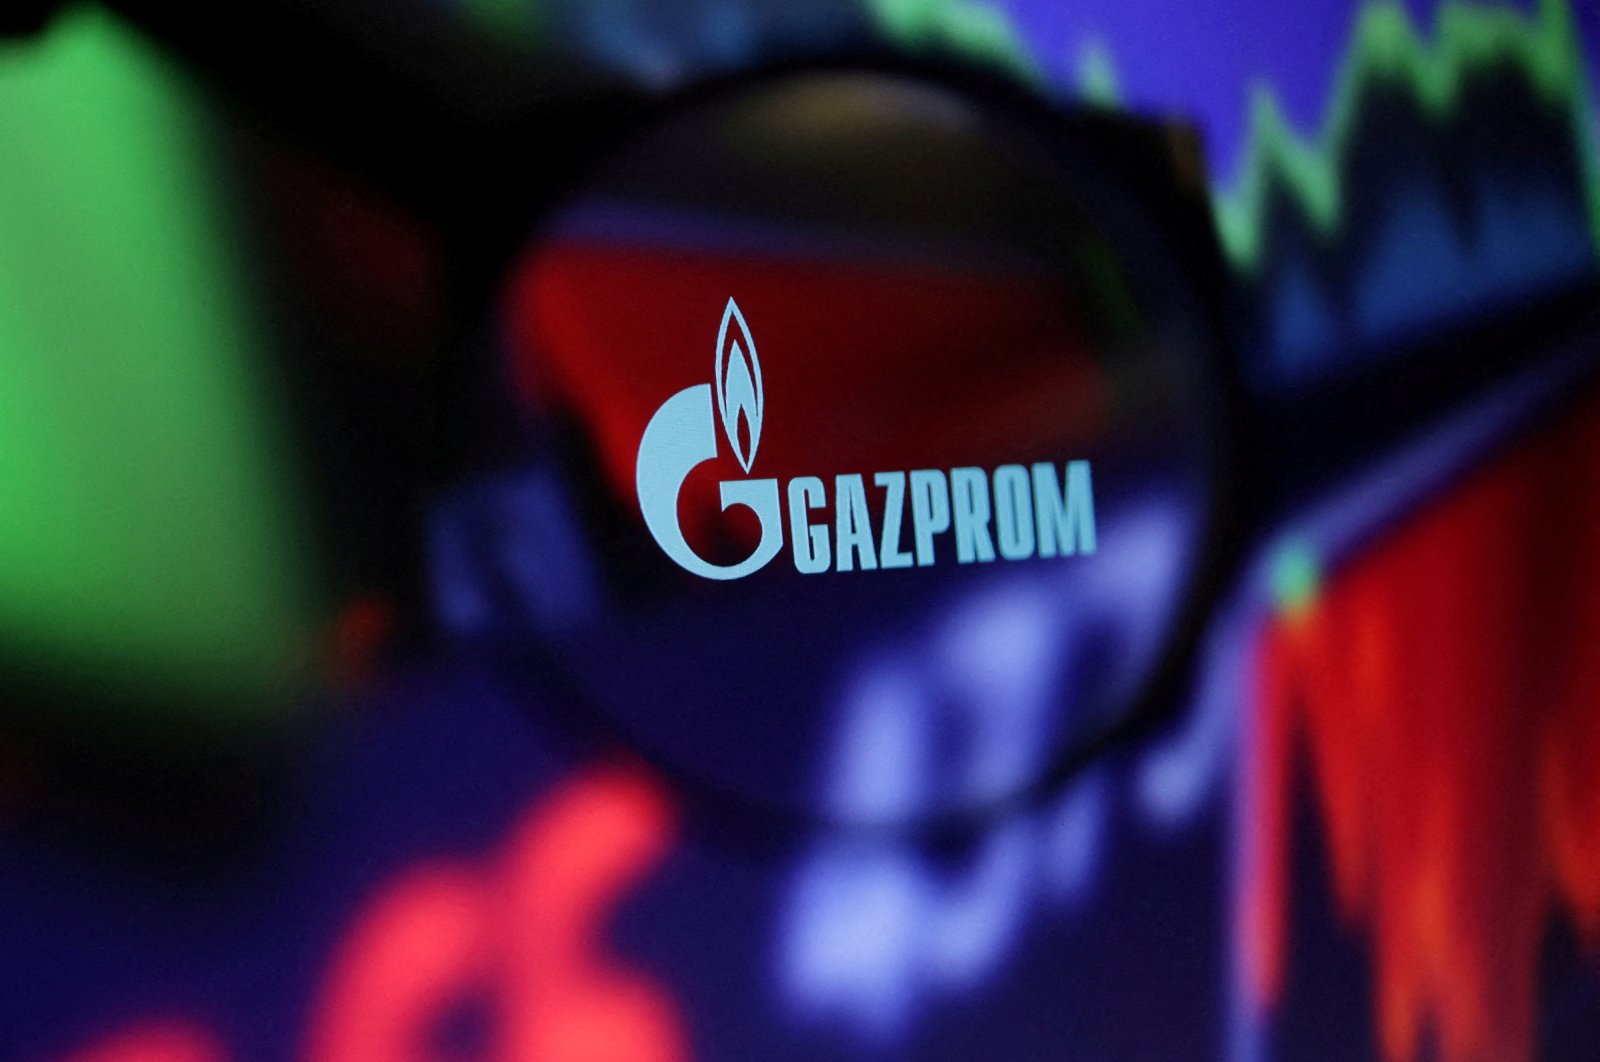 The Gazprom logo and stock graph are seen through a magnifier displayed in this illustration, Sept. 4, 2022. (Reuters File Photo)